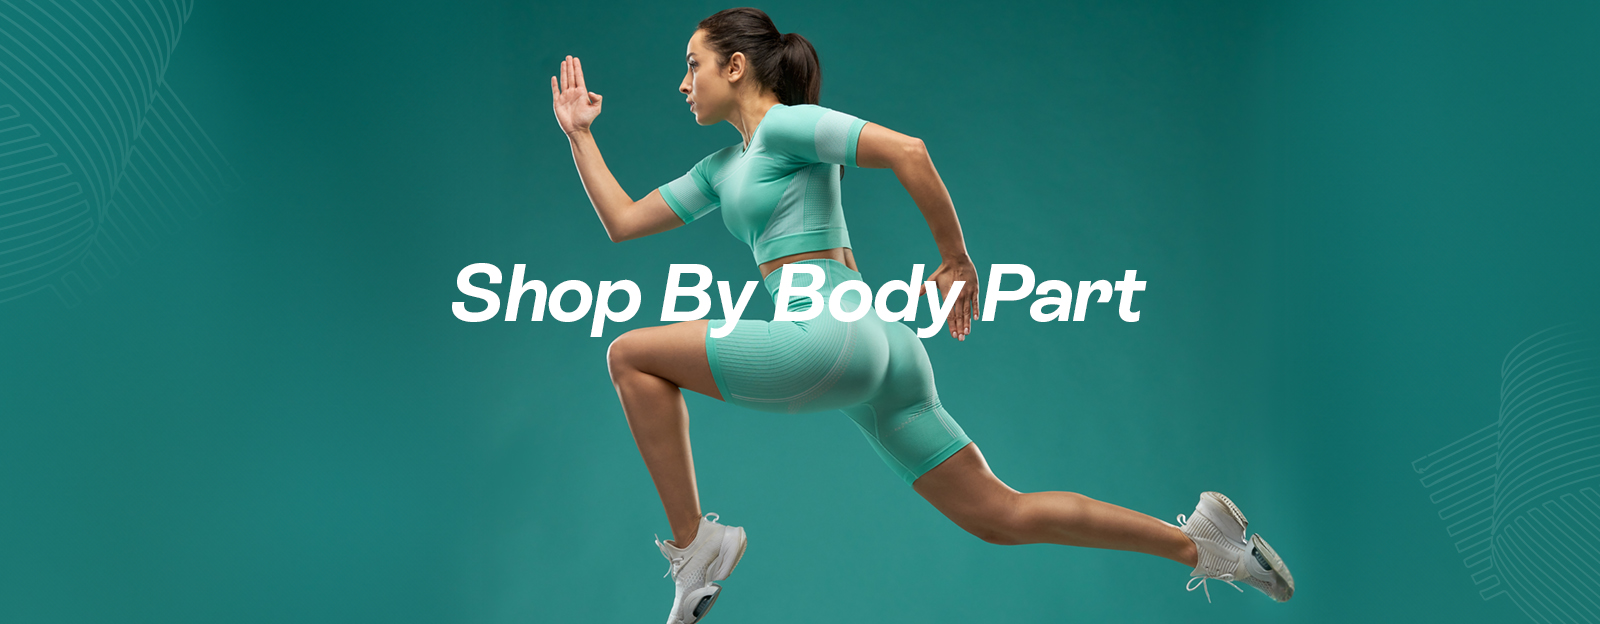 Shop By Body Part